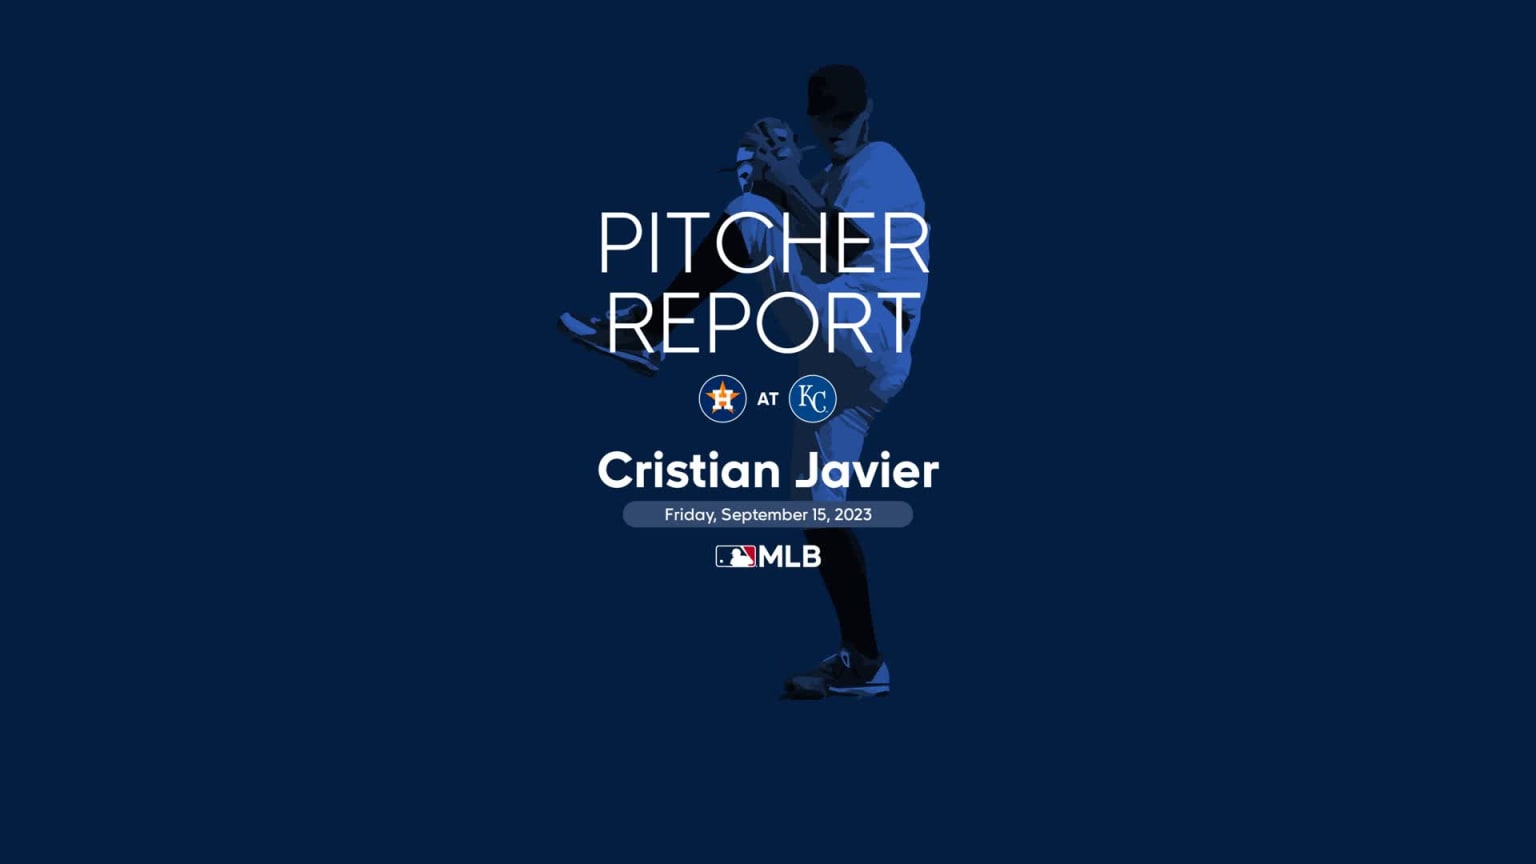 Cristian Javier's outing against the Royals, 09/15/2023